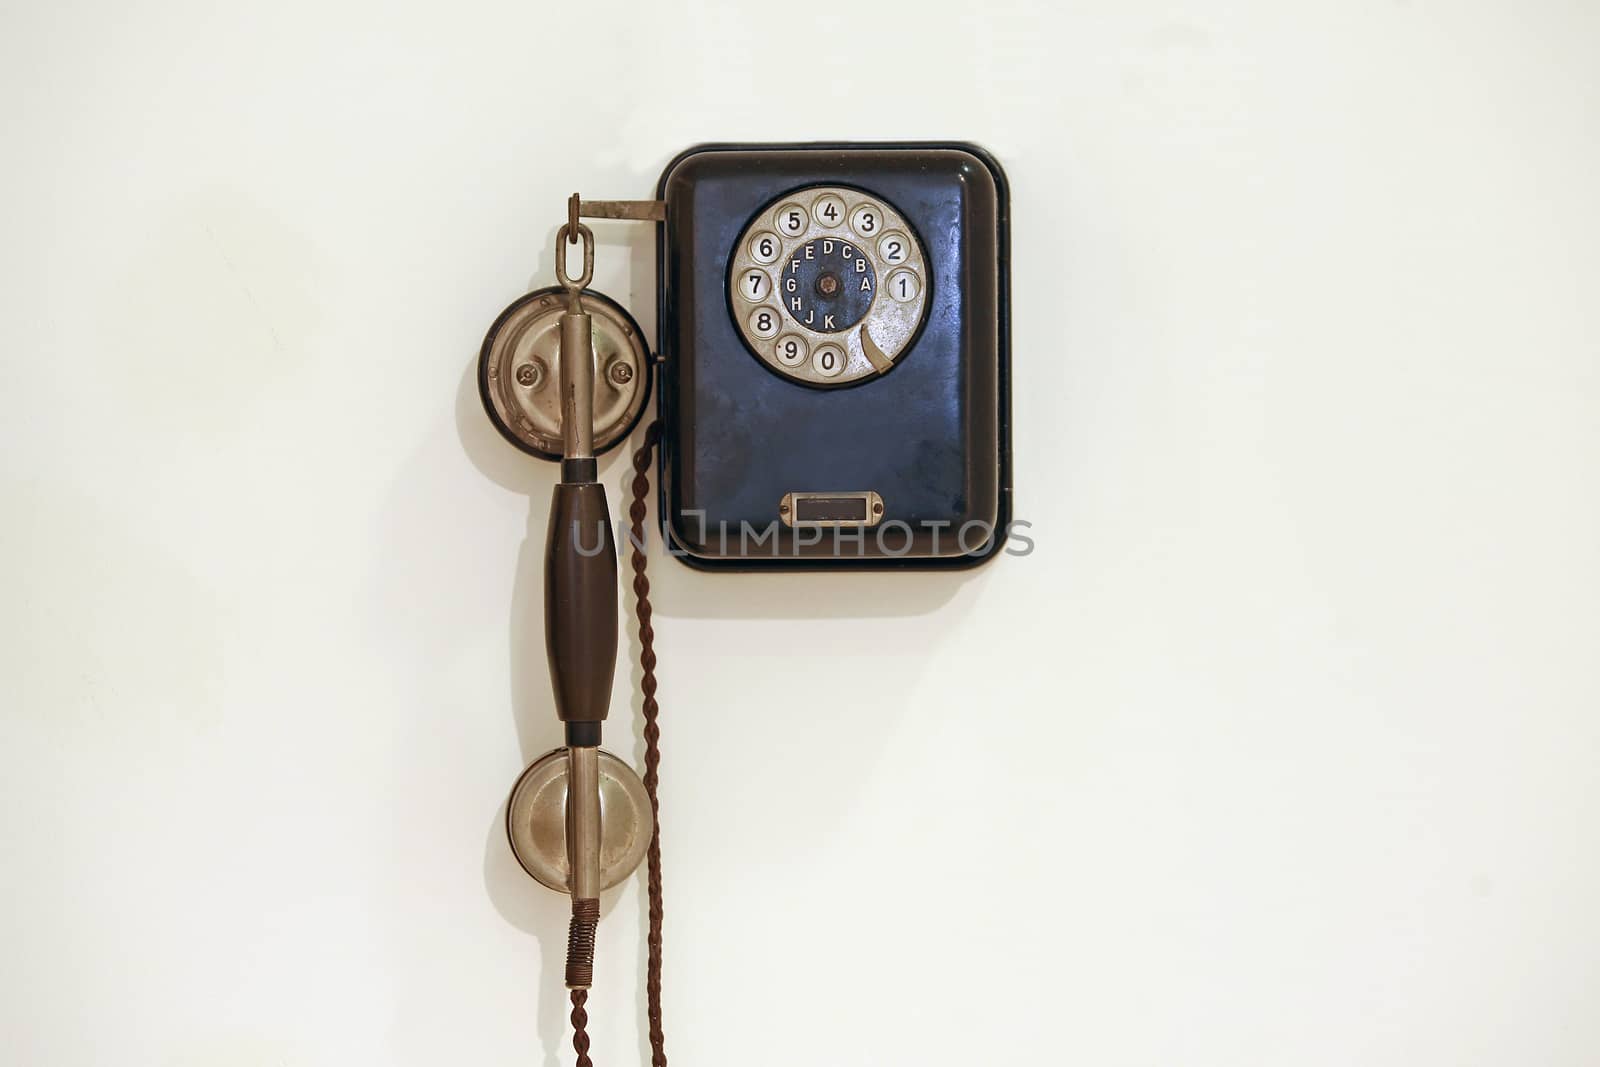 old phone, nineteenth and twentieth century, from the beginning of telephony by nemar74